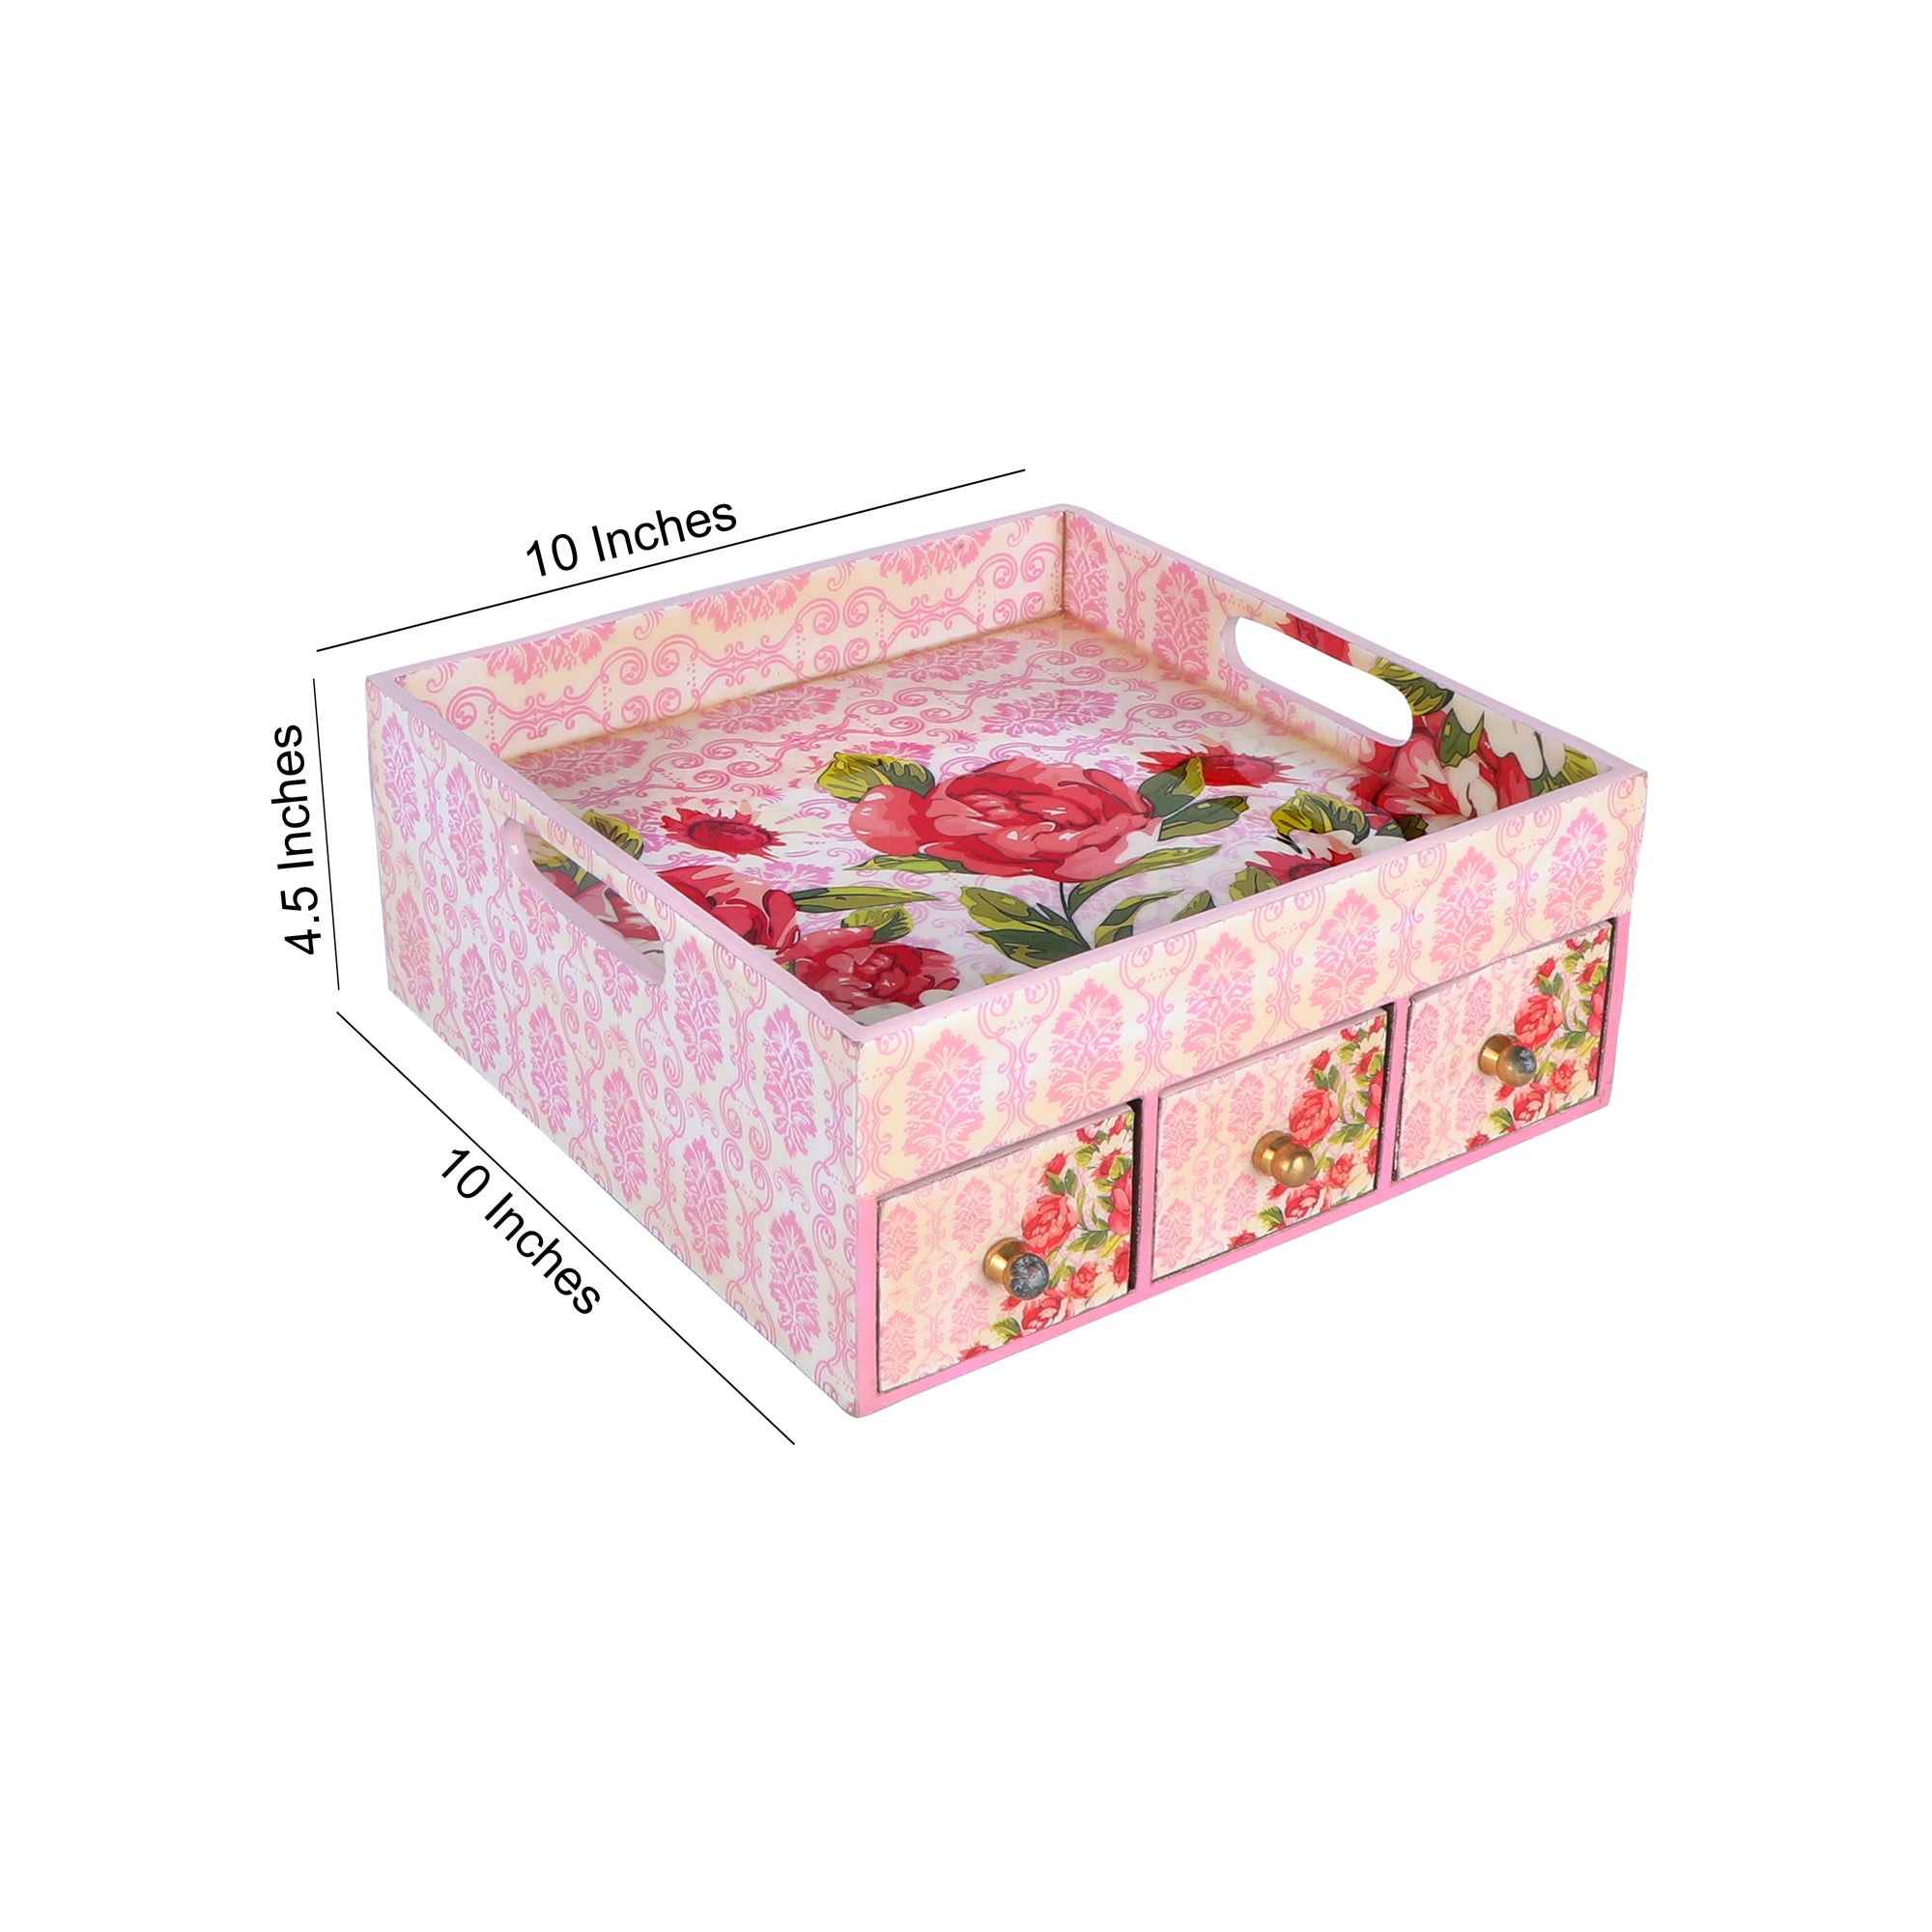 Single Tray - Pink Rose With 3 Drawers 6- The Home Co.